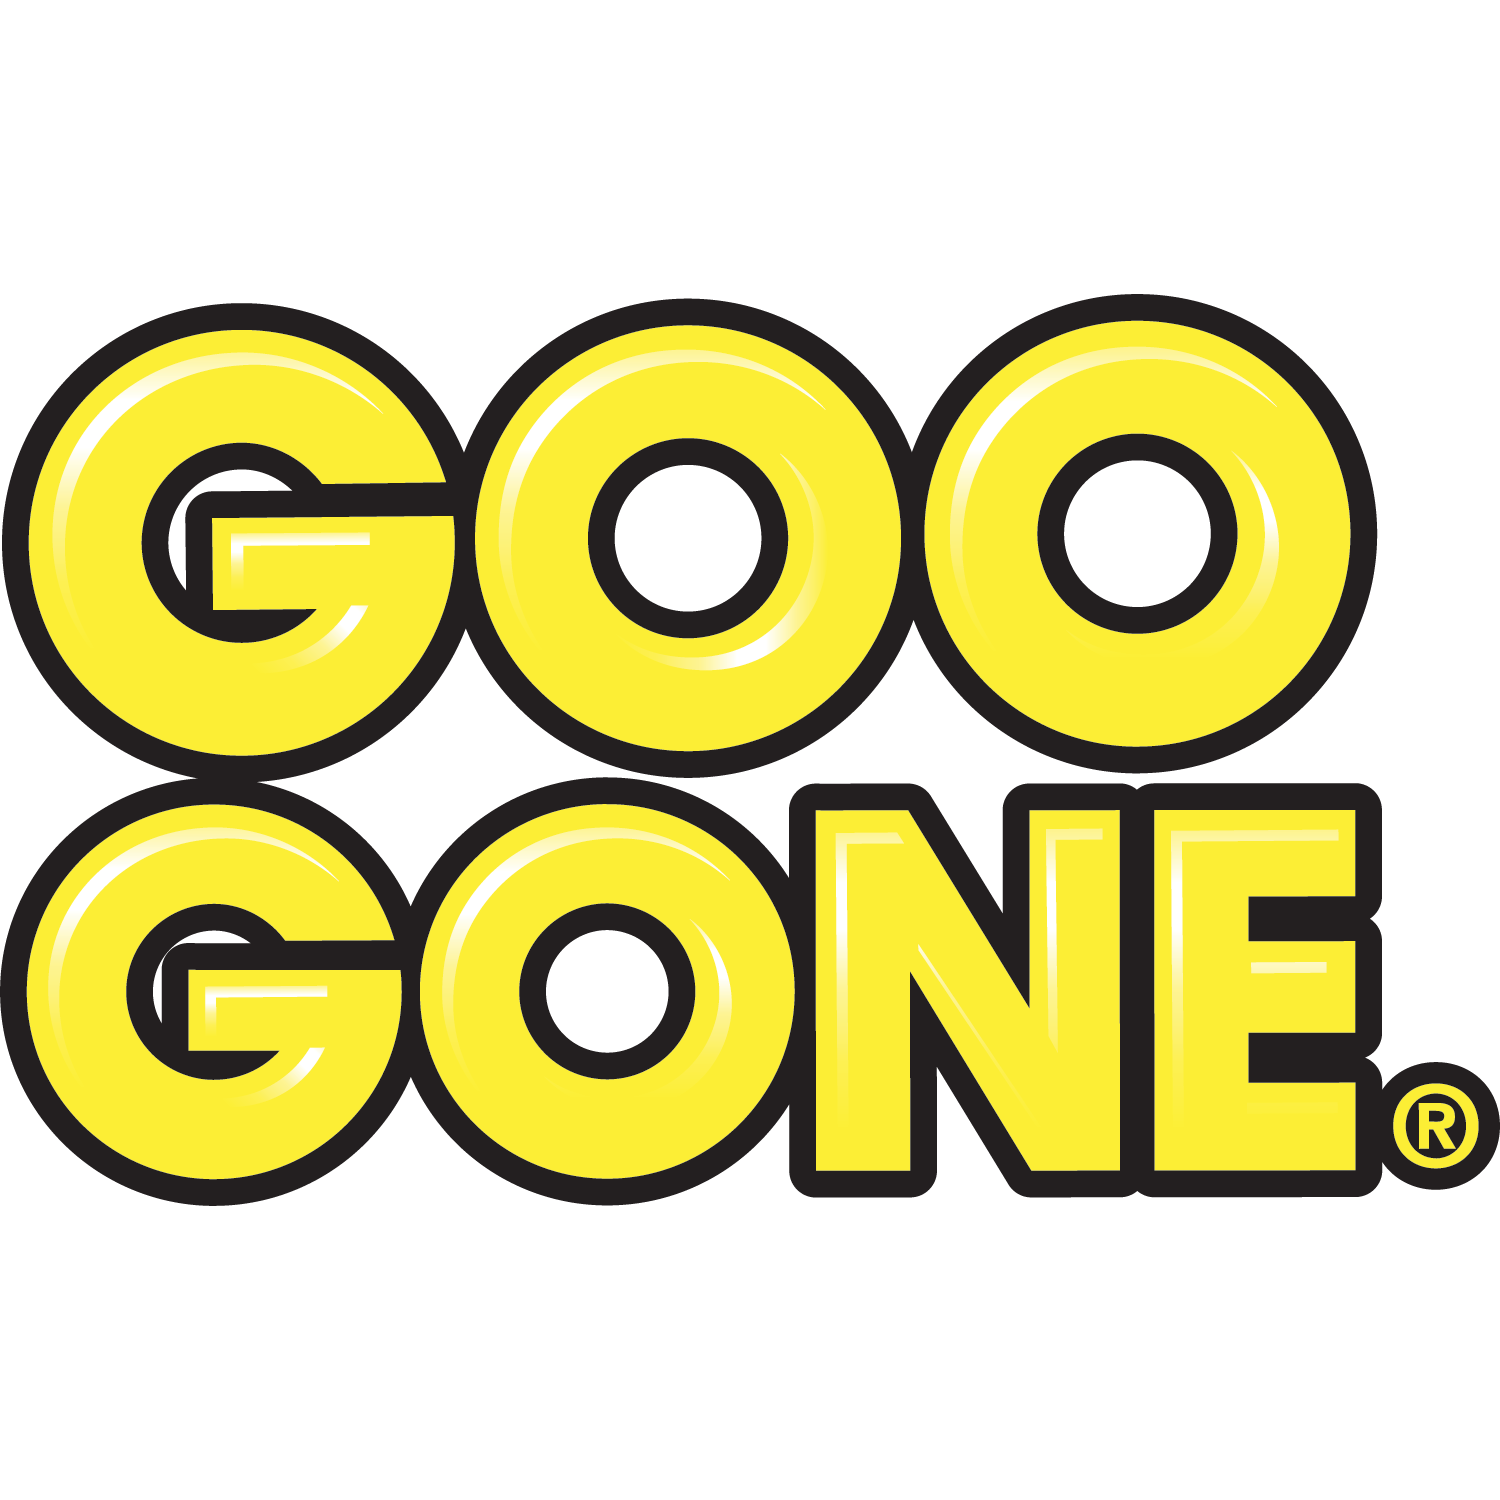 Goo Gone Brand GIFs on GIPHY - Be Animated